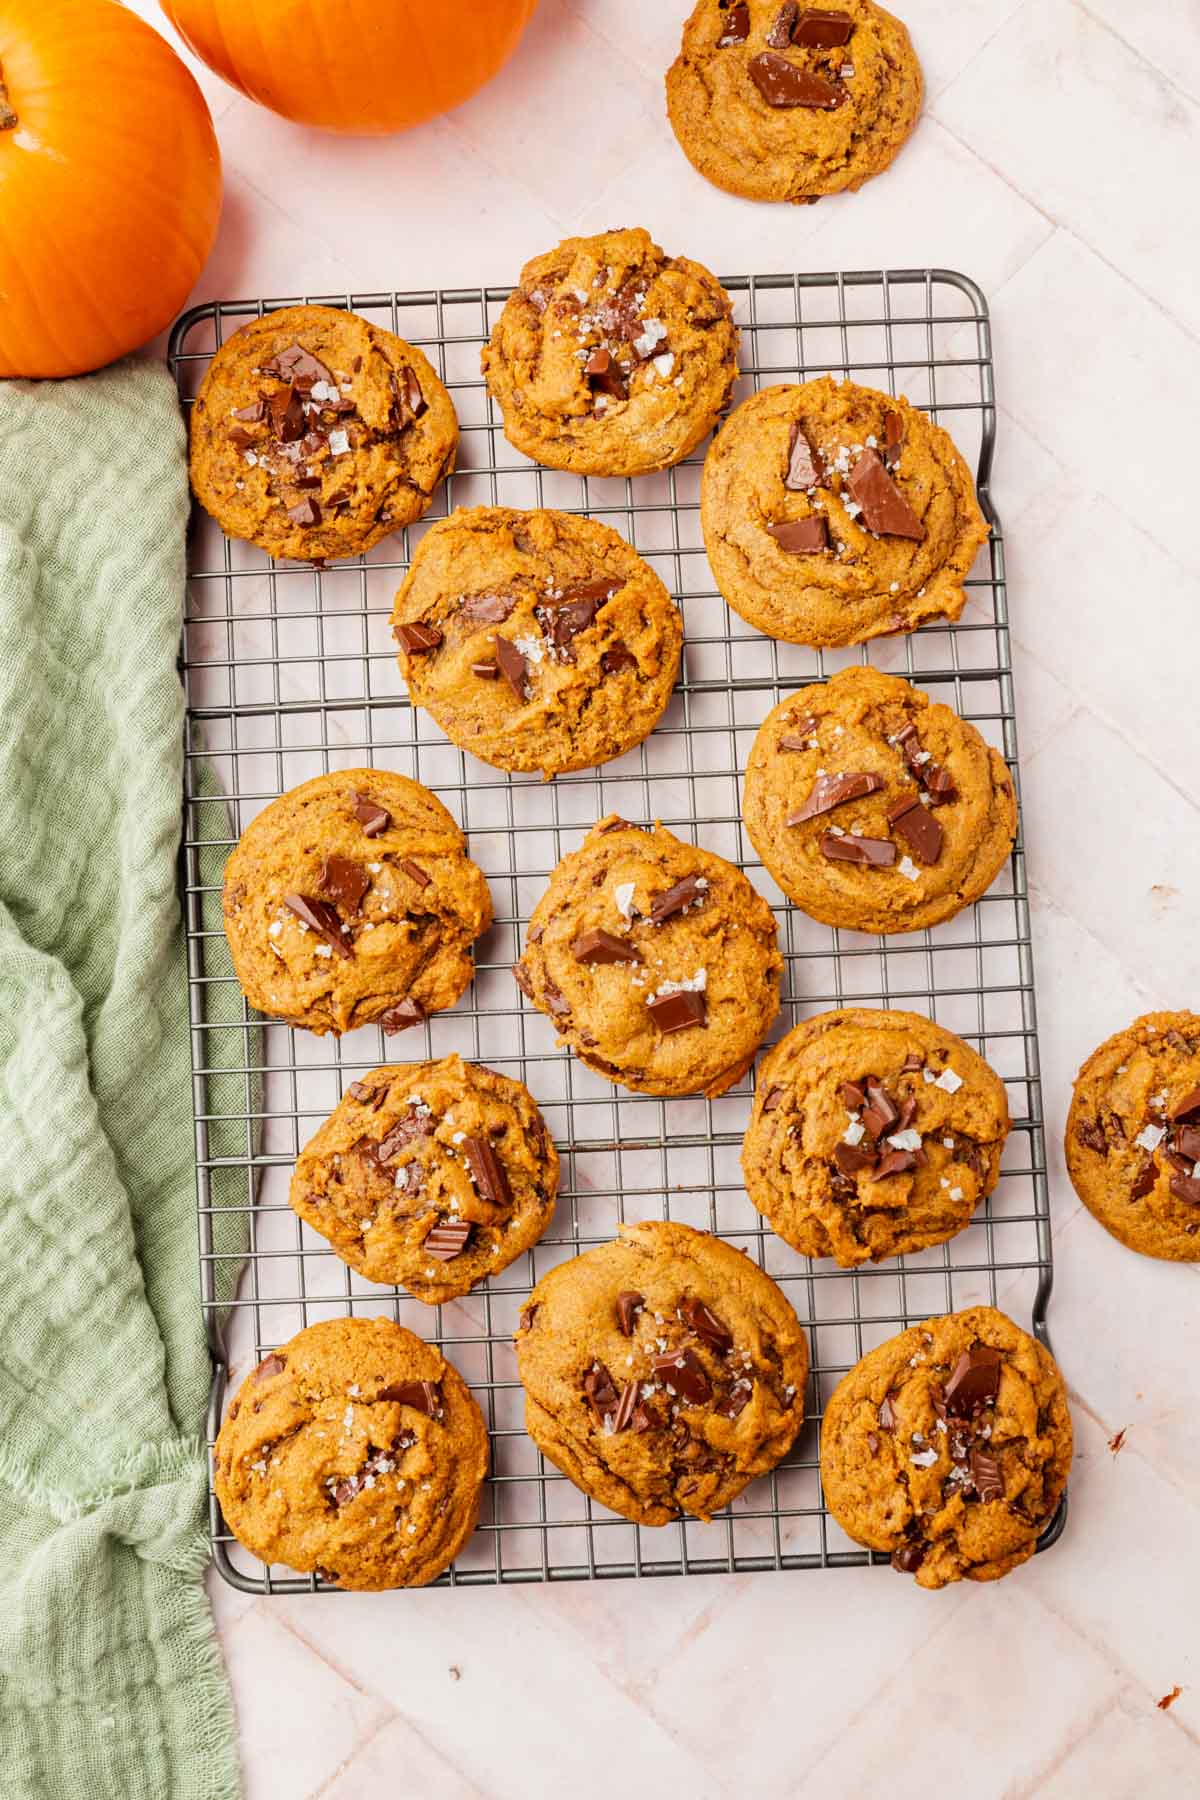 An overhead view of a cooling rack filled with gluten-free pumpkin chocolate chunk cookies with sea salt next to a green linen napkin.